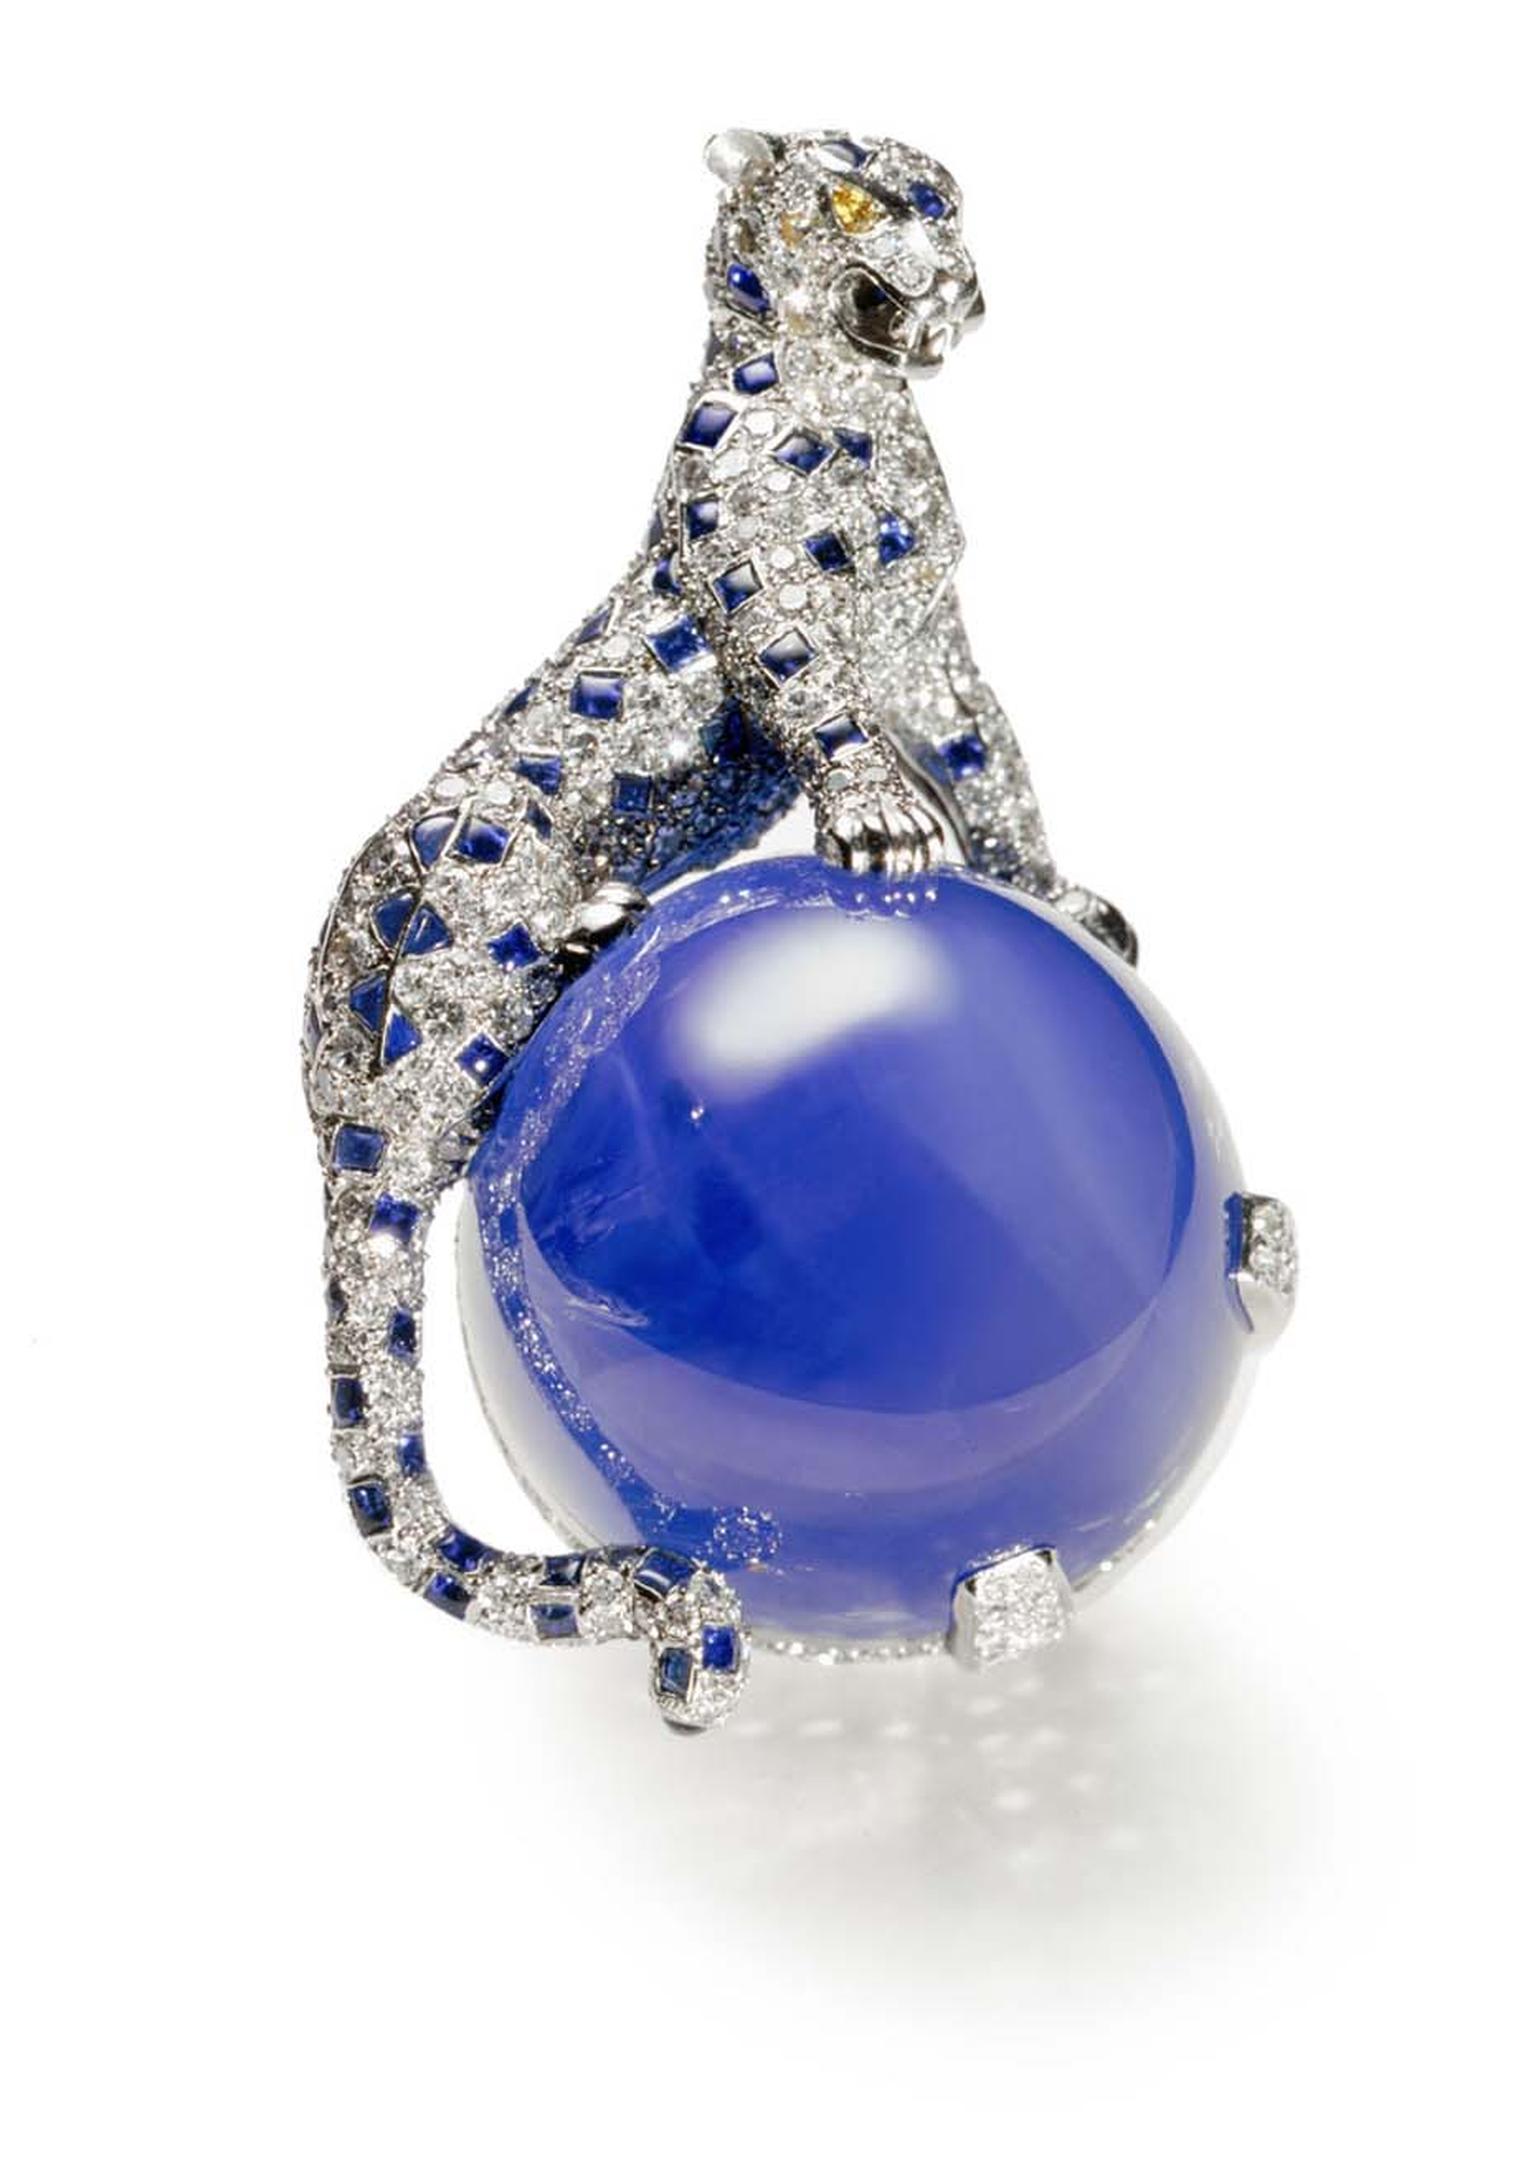 The Duchess of Windsor’s Panther brooch from 1949, which the press referred to at the time as the "atomic bomb of jewellery", was recently exhibited at the Cartier Style and History exhibition in Paris